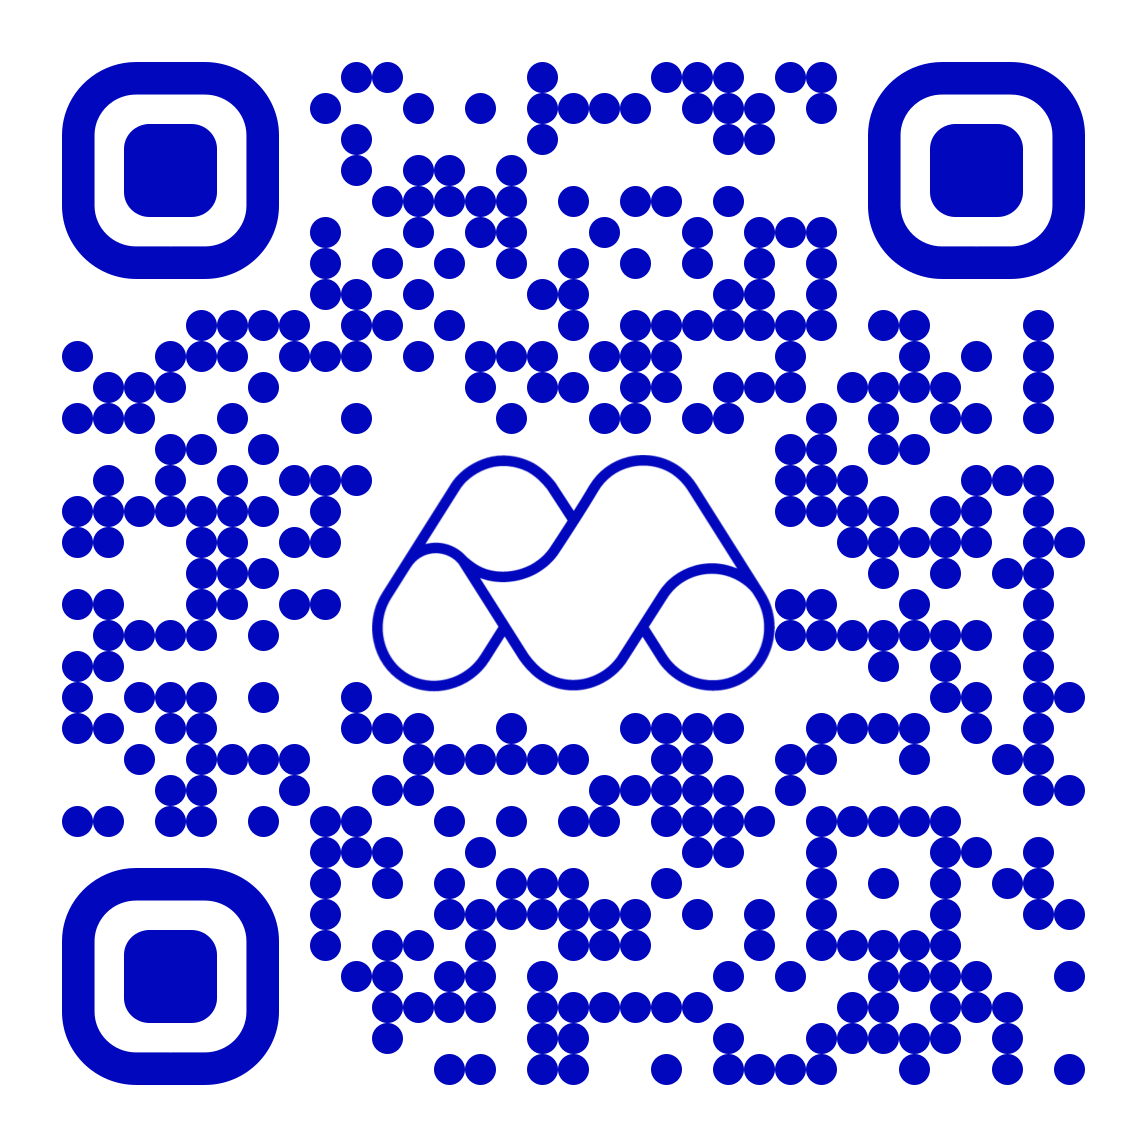 Scan with<br />
your phone